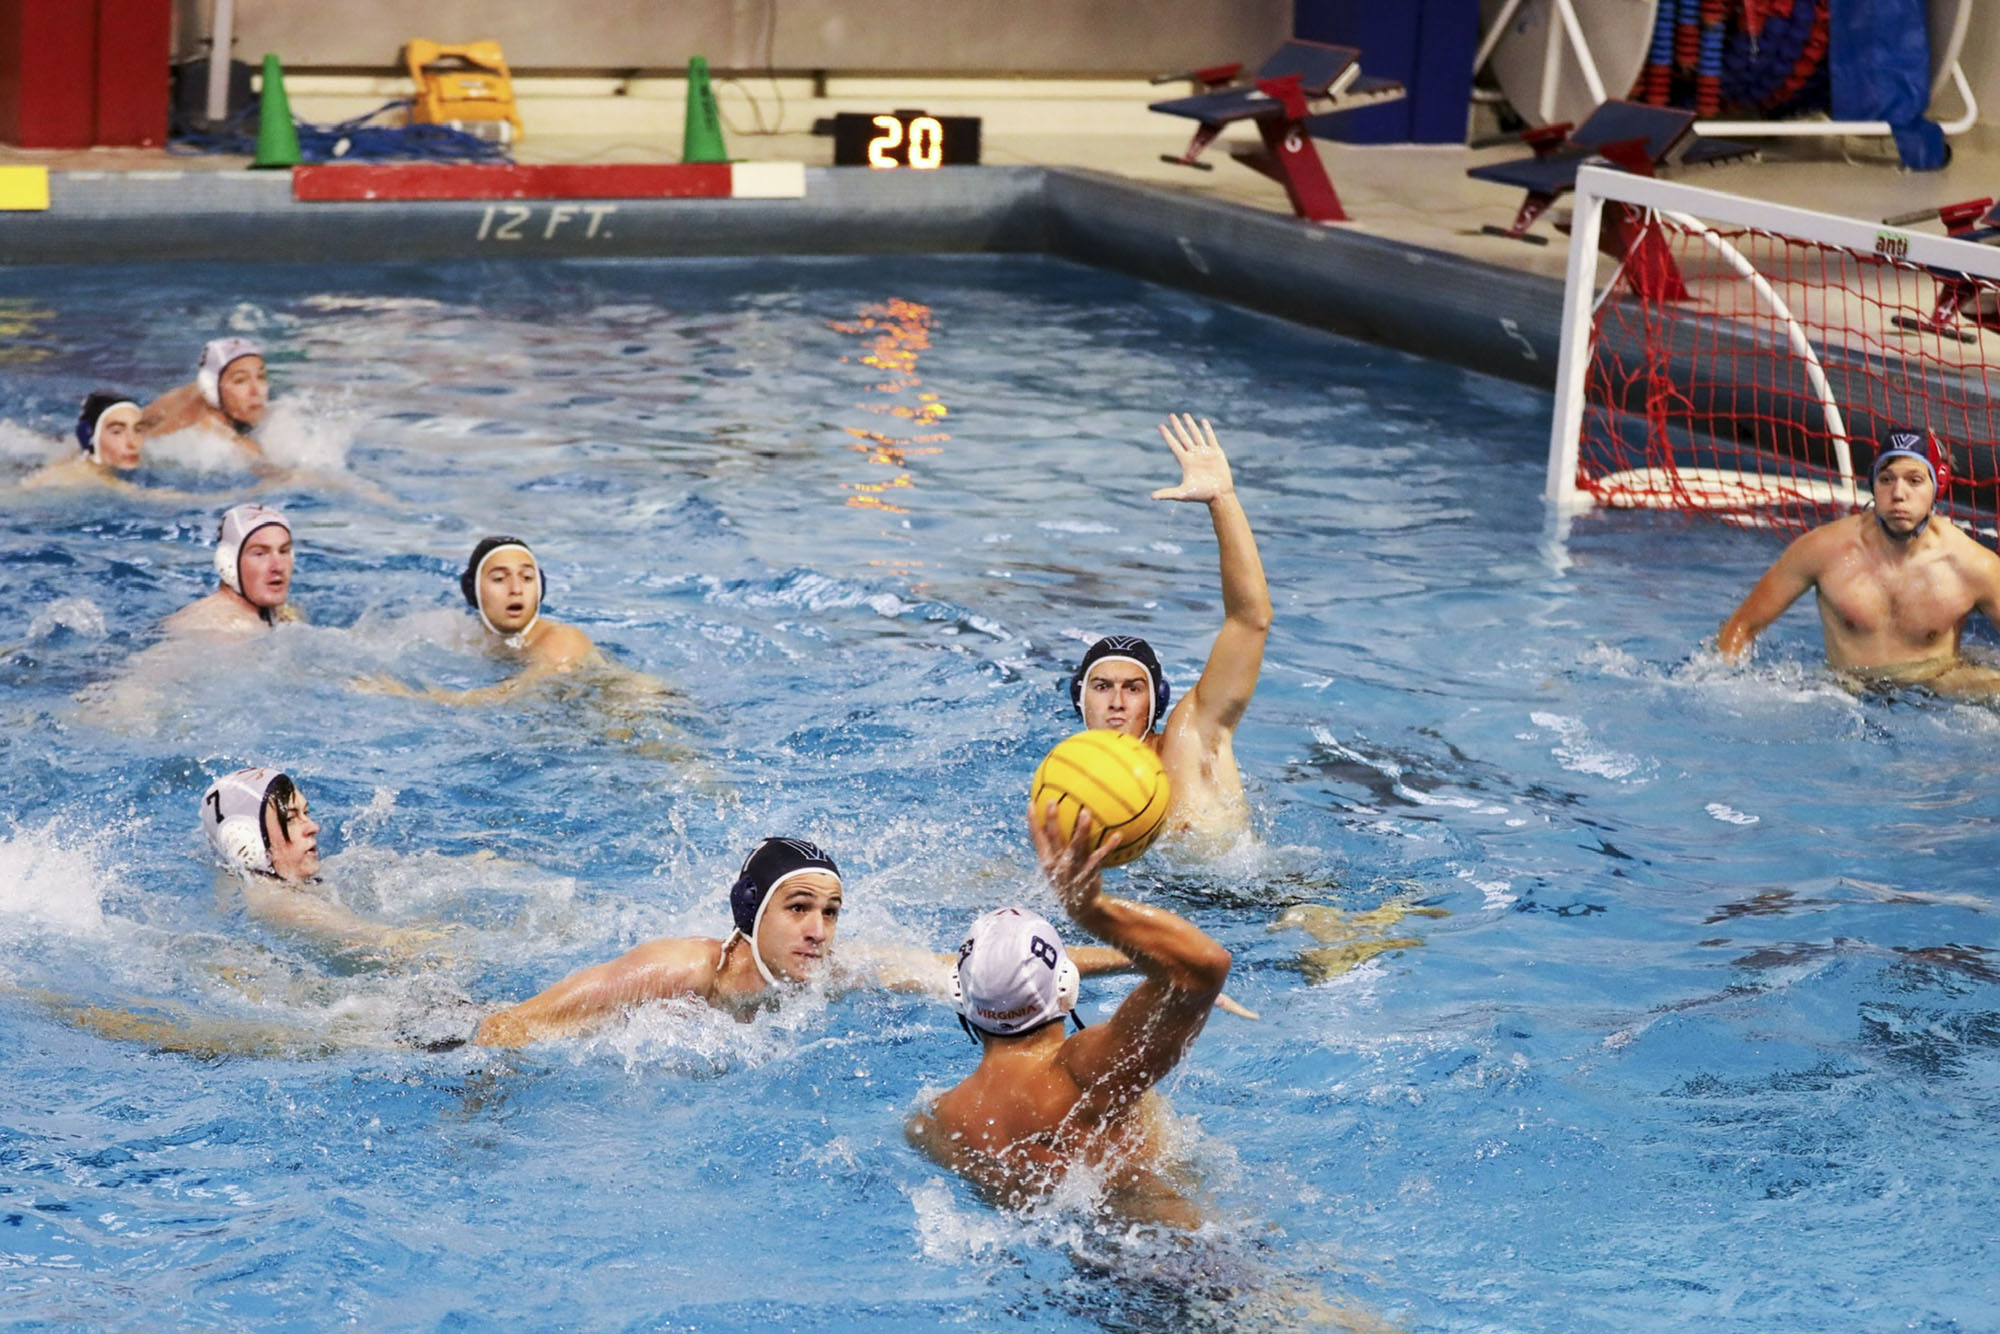 Mens Water Polo team playing agains Oregon State University